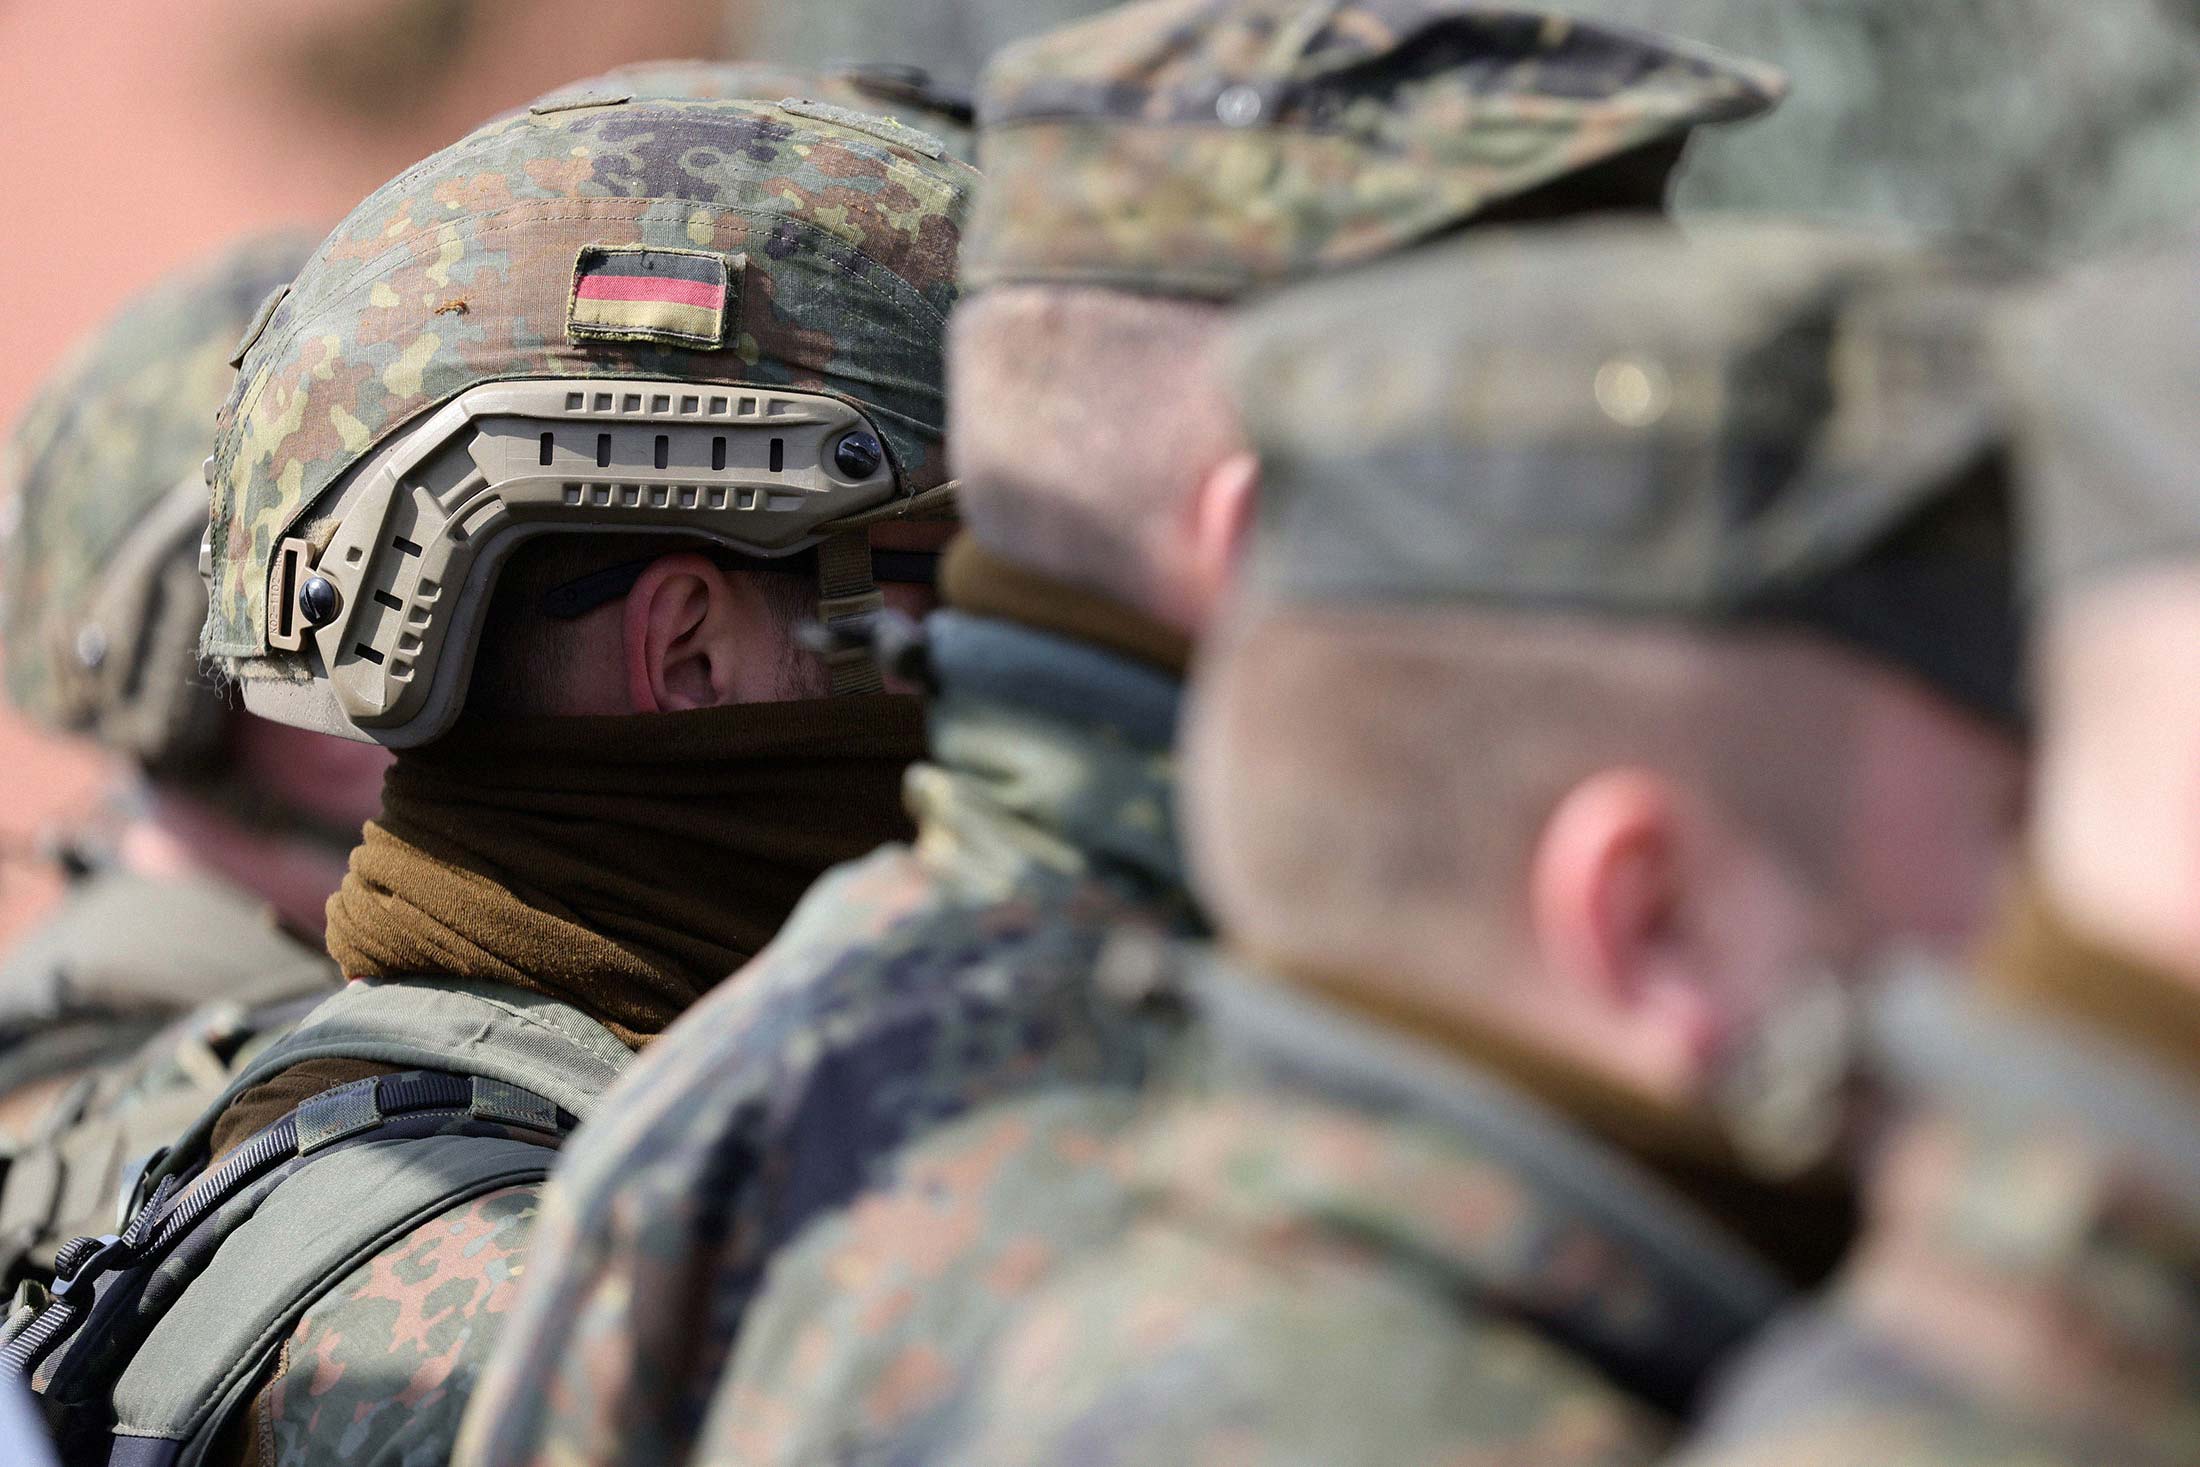 A combat helmet of a soldier of the Bundeswehr’s Panzerbrigade 21 tank brigade on March 30 in Augustdorf, Germany.